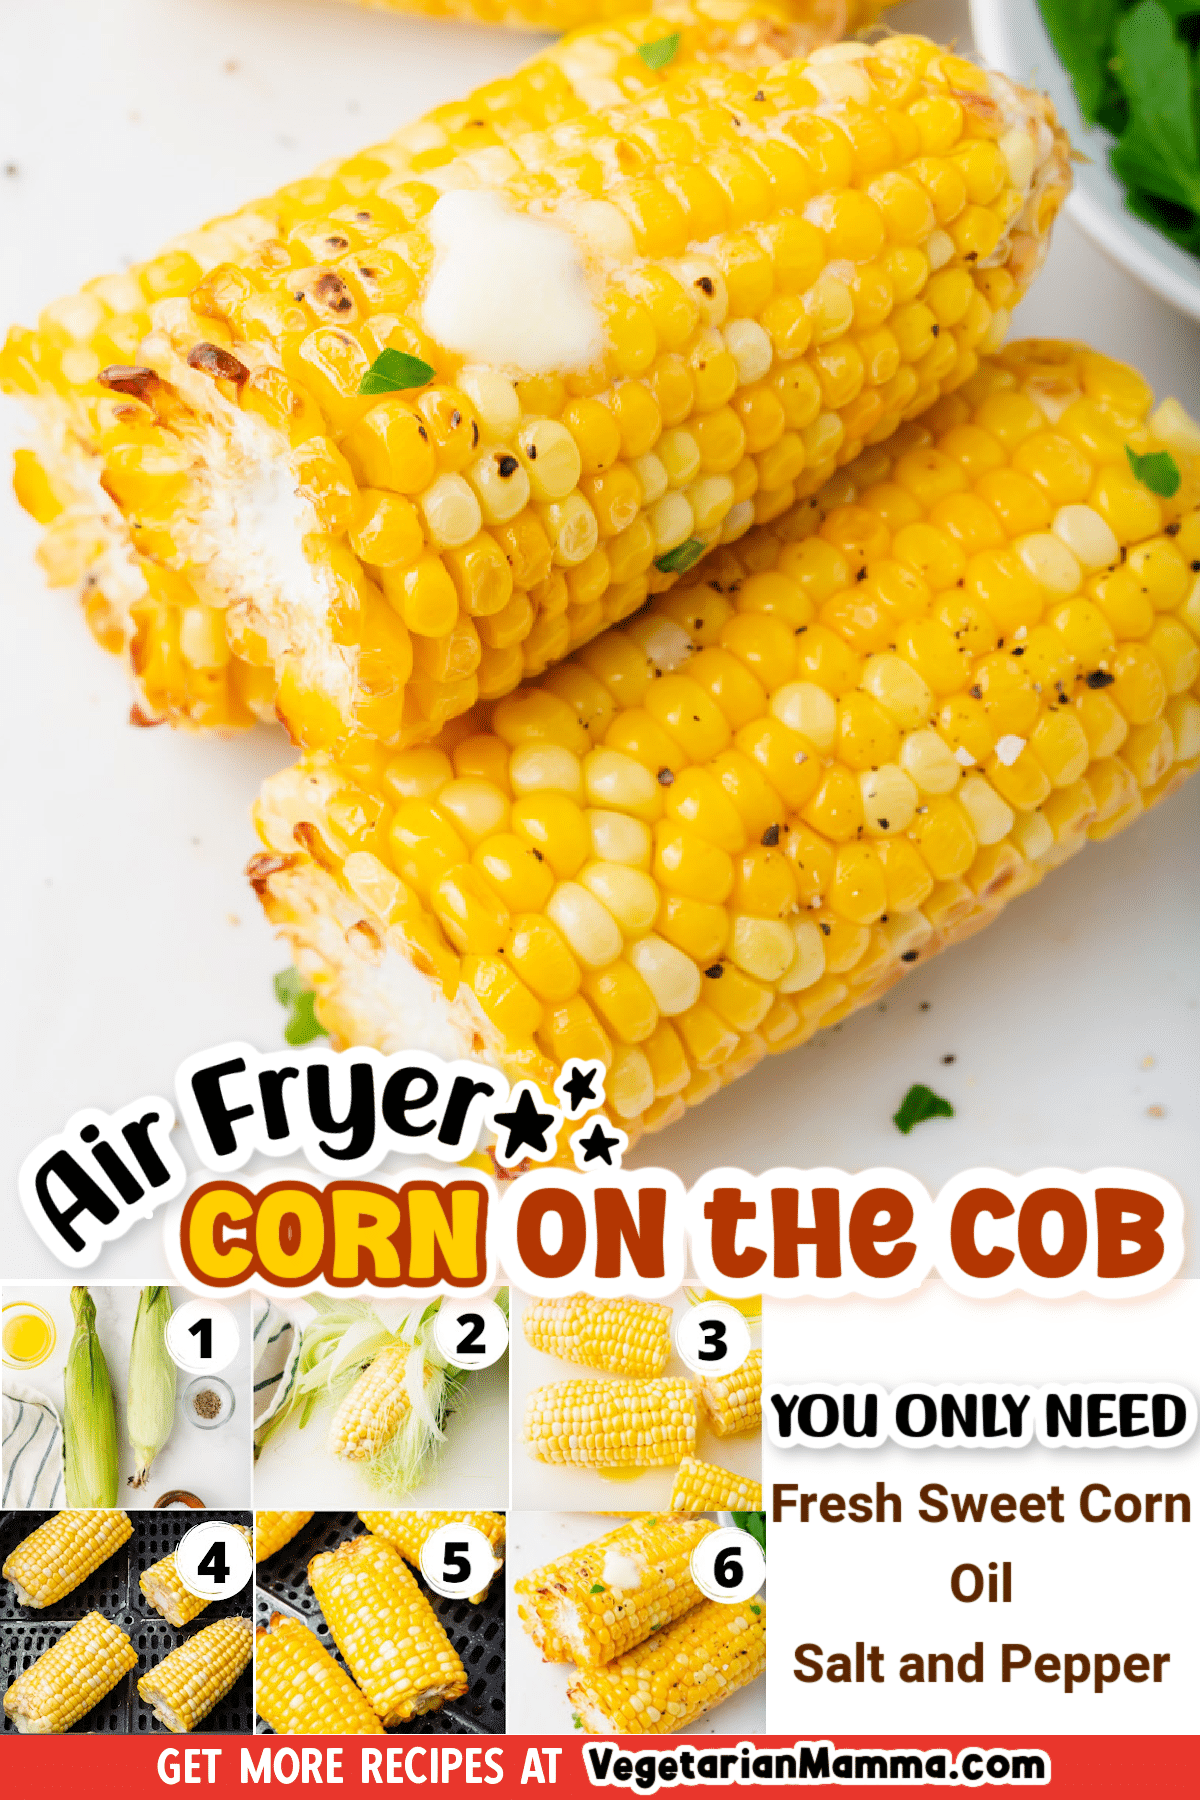 Air fryer corn on the cob is the quickest and most delicious airfryer recipe to date. The airfryer quickly roasts the sweet corn, fresh or frozen, into an irresistible side dish! You are going to love this air fried corn on the cob! #cornonthecob #corn #airfryer